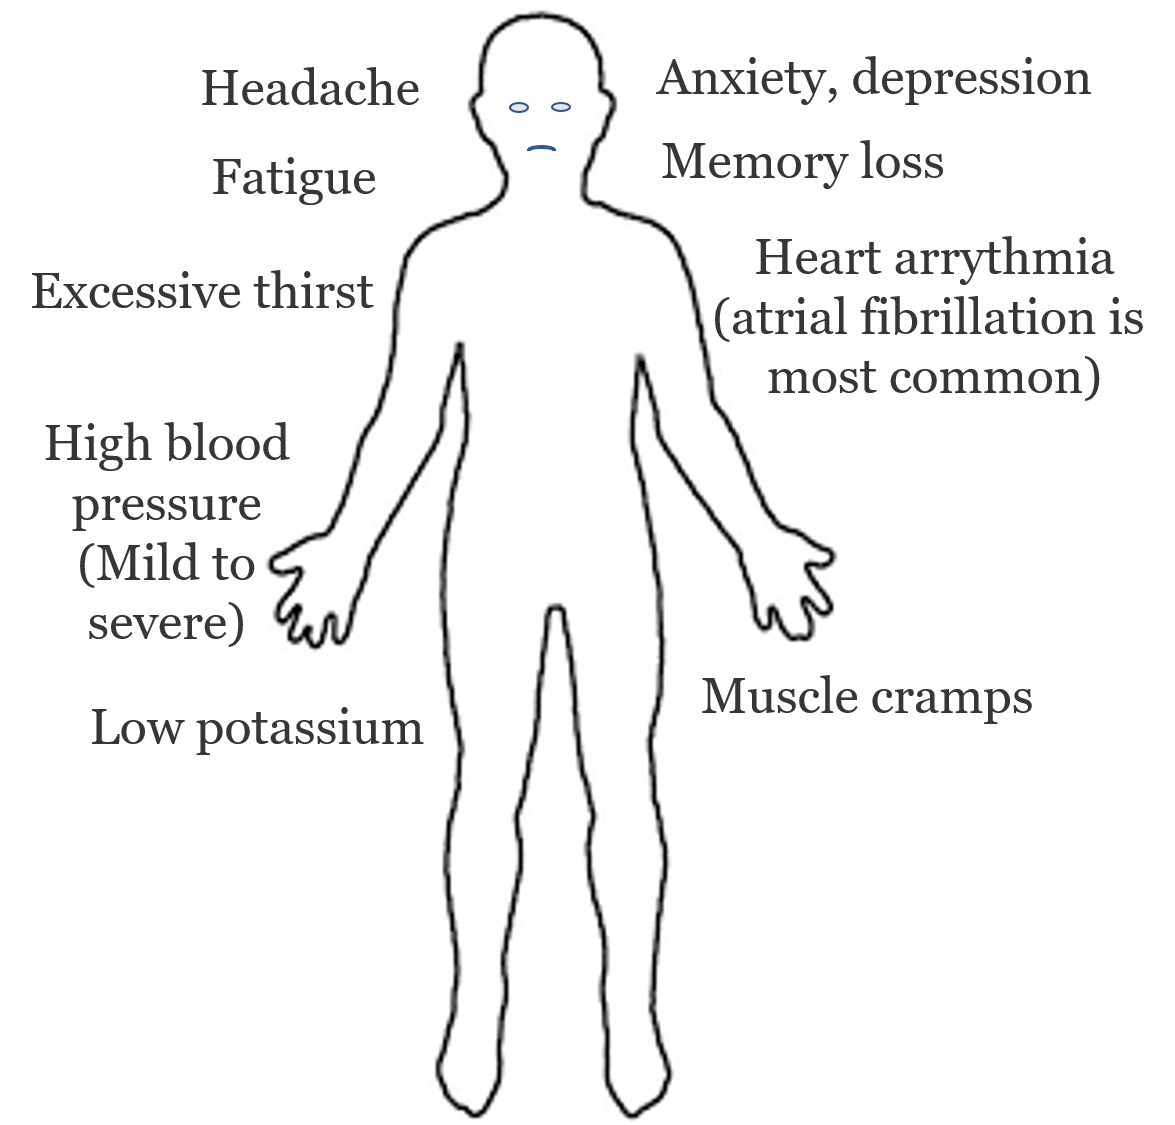 Signs and symptoms of primary hyperaldosteronism (Conn’s syndrome): Many patients have no signs except high blood pressure. The symptoms, if present, can be variable